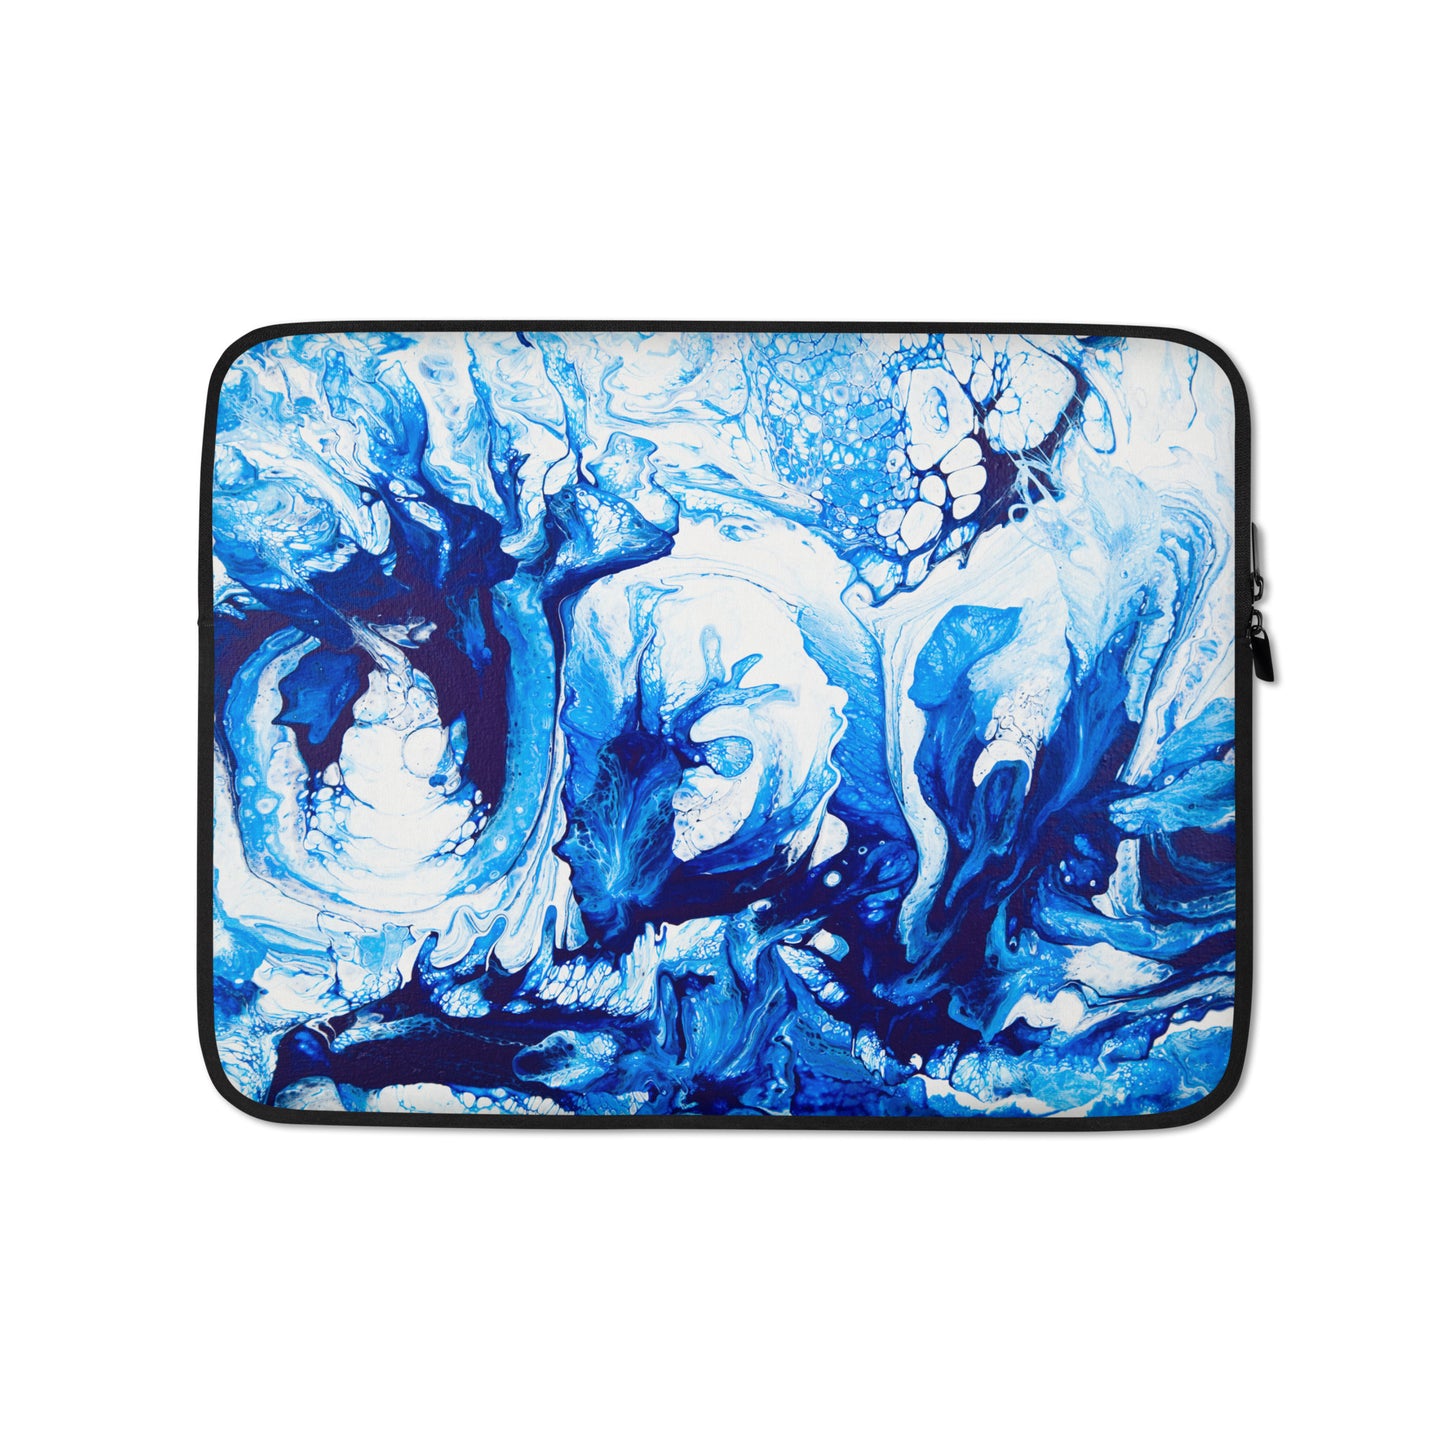 NightOwl Studio Padded Laptop Sleeve with Faux Fur Lining, 13 and 15 Inch Covers for Portable Computers and Large Tablets, Slim and Portable Neoprene for Work, Travel, or Gaming, The Jester